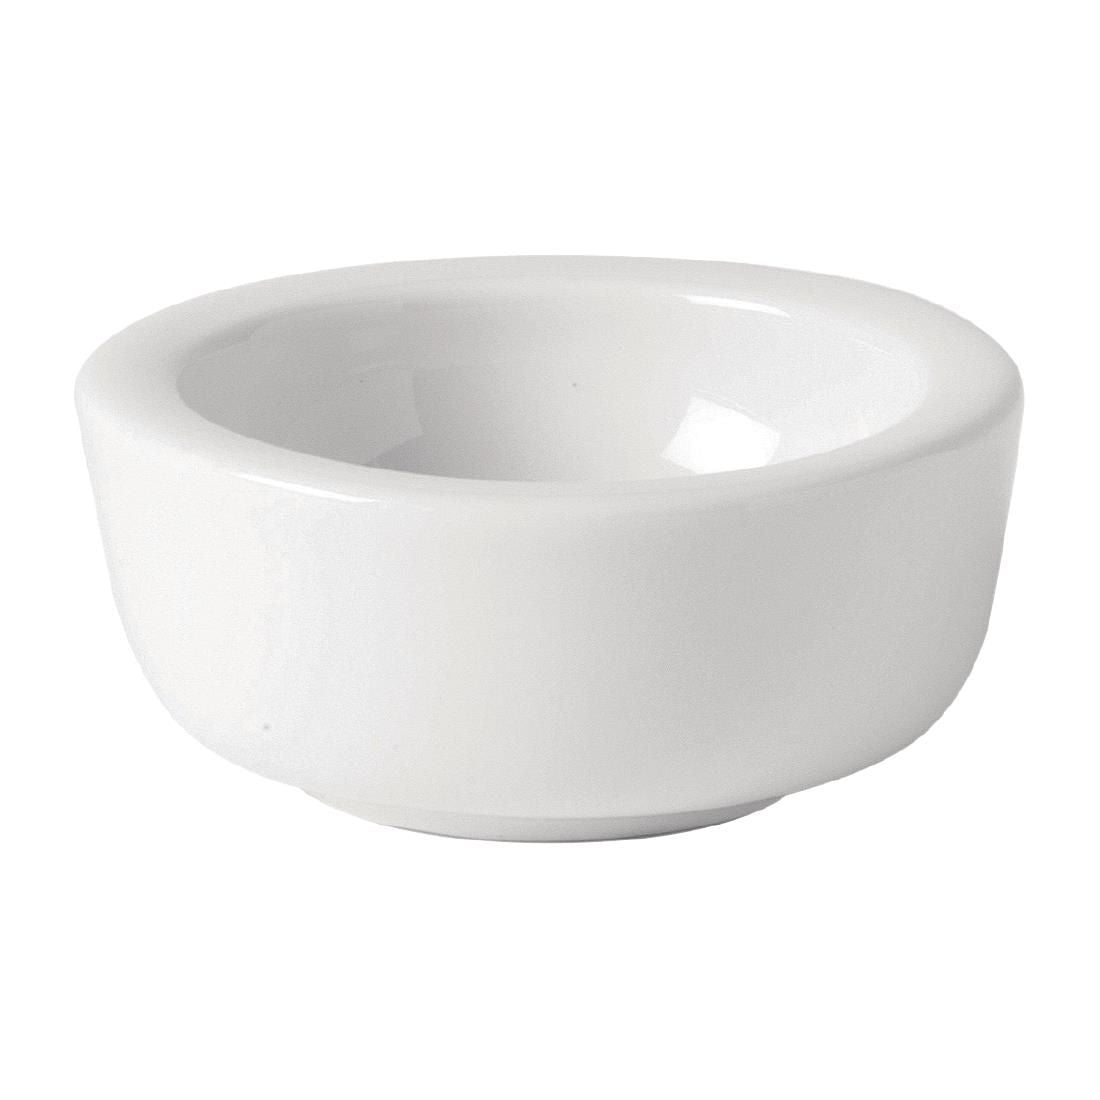 CW265 Utopia Titan Butter Dishes White 65mm (Pack of 6) JD Catering Equipment Solutions Ltd